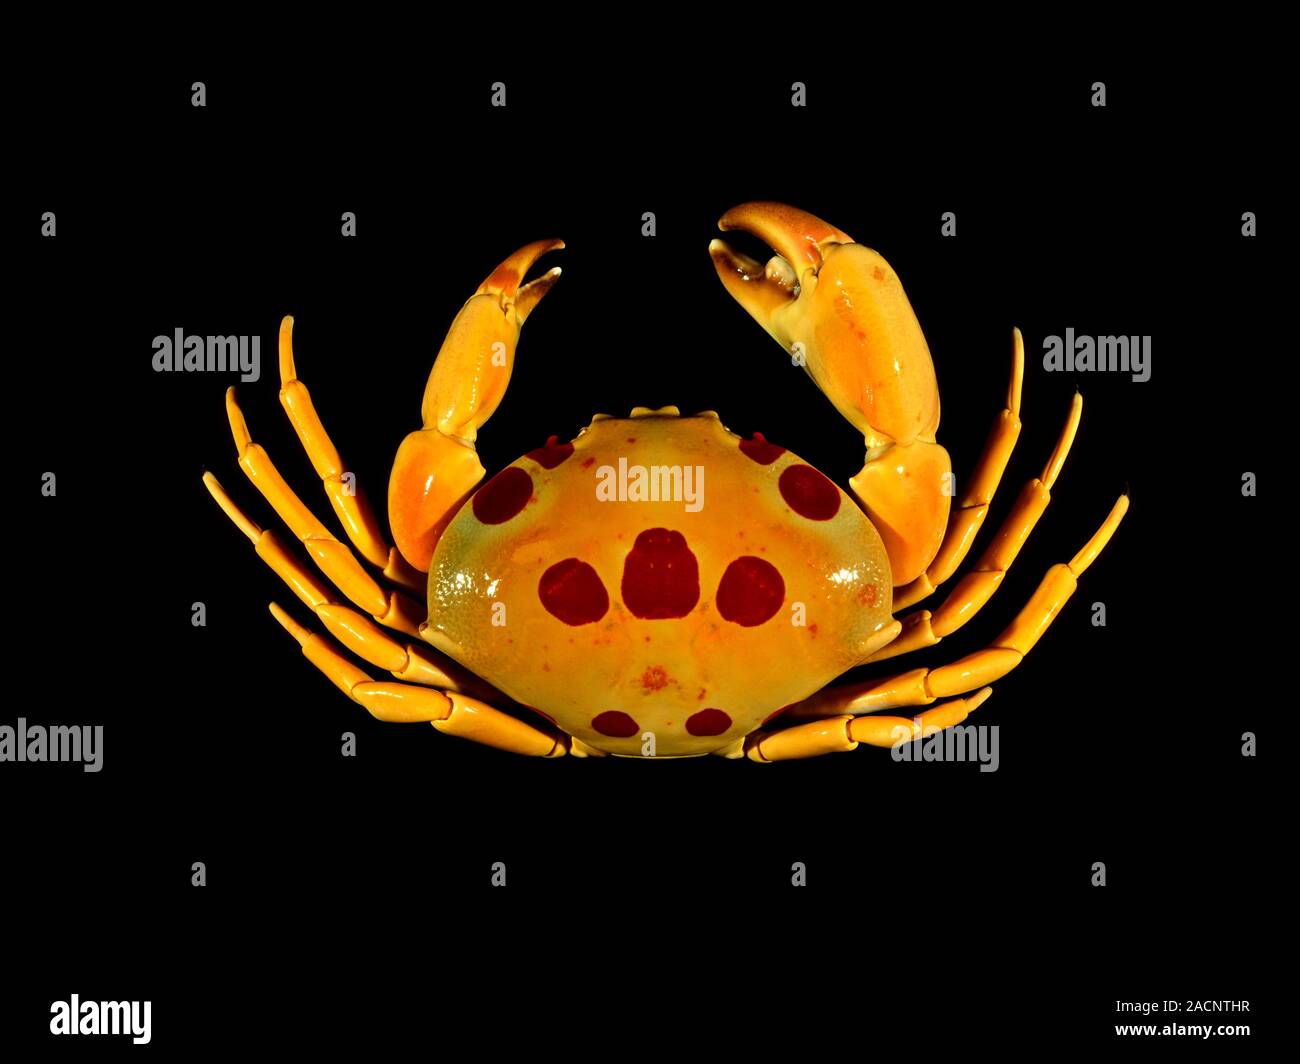 Spotted rock crab (Carpilius maculatus). This edible crab lives at a depth of 10-15 metres in the Indo-West Pacific. Its carapace (upper shell) is cov Stock Photo